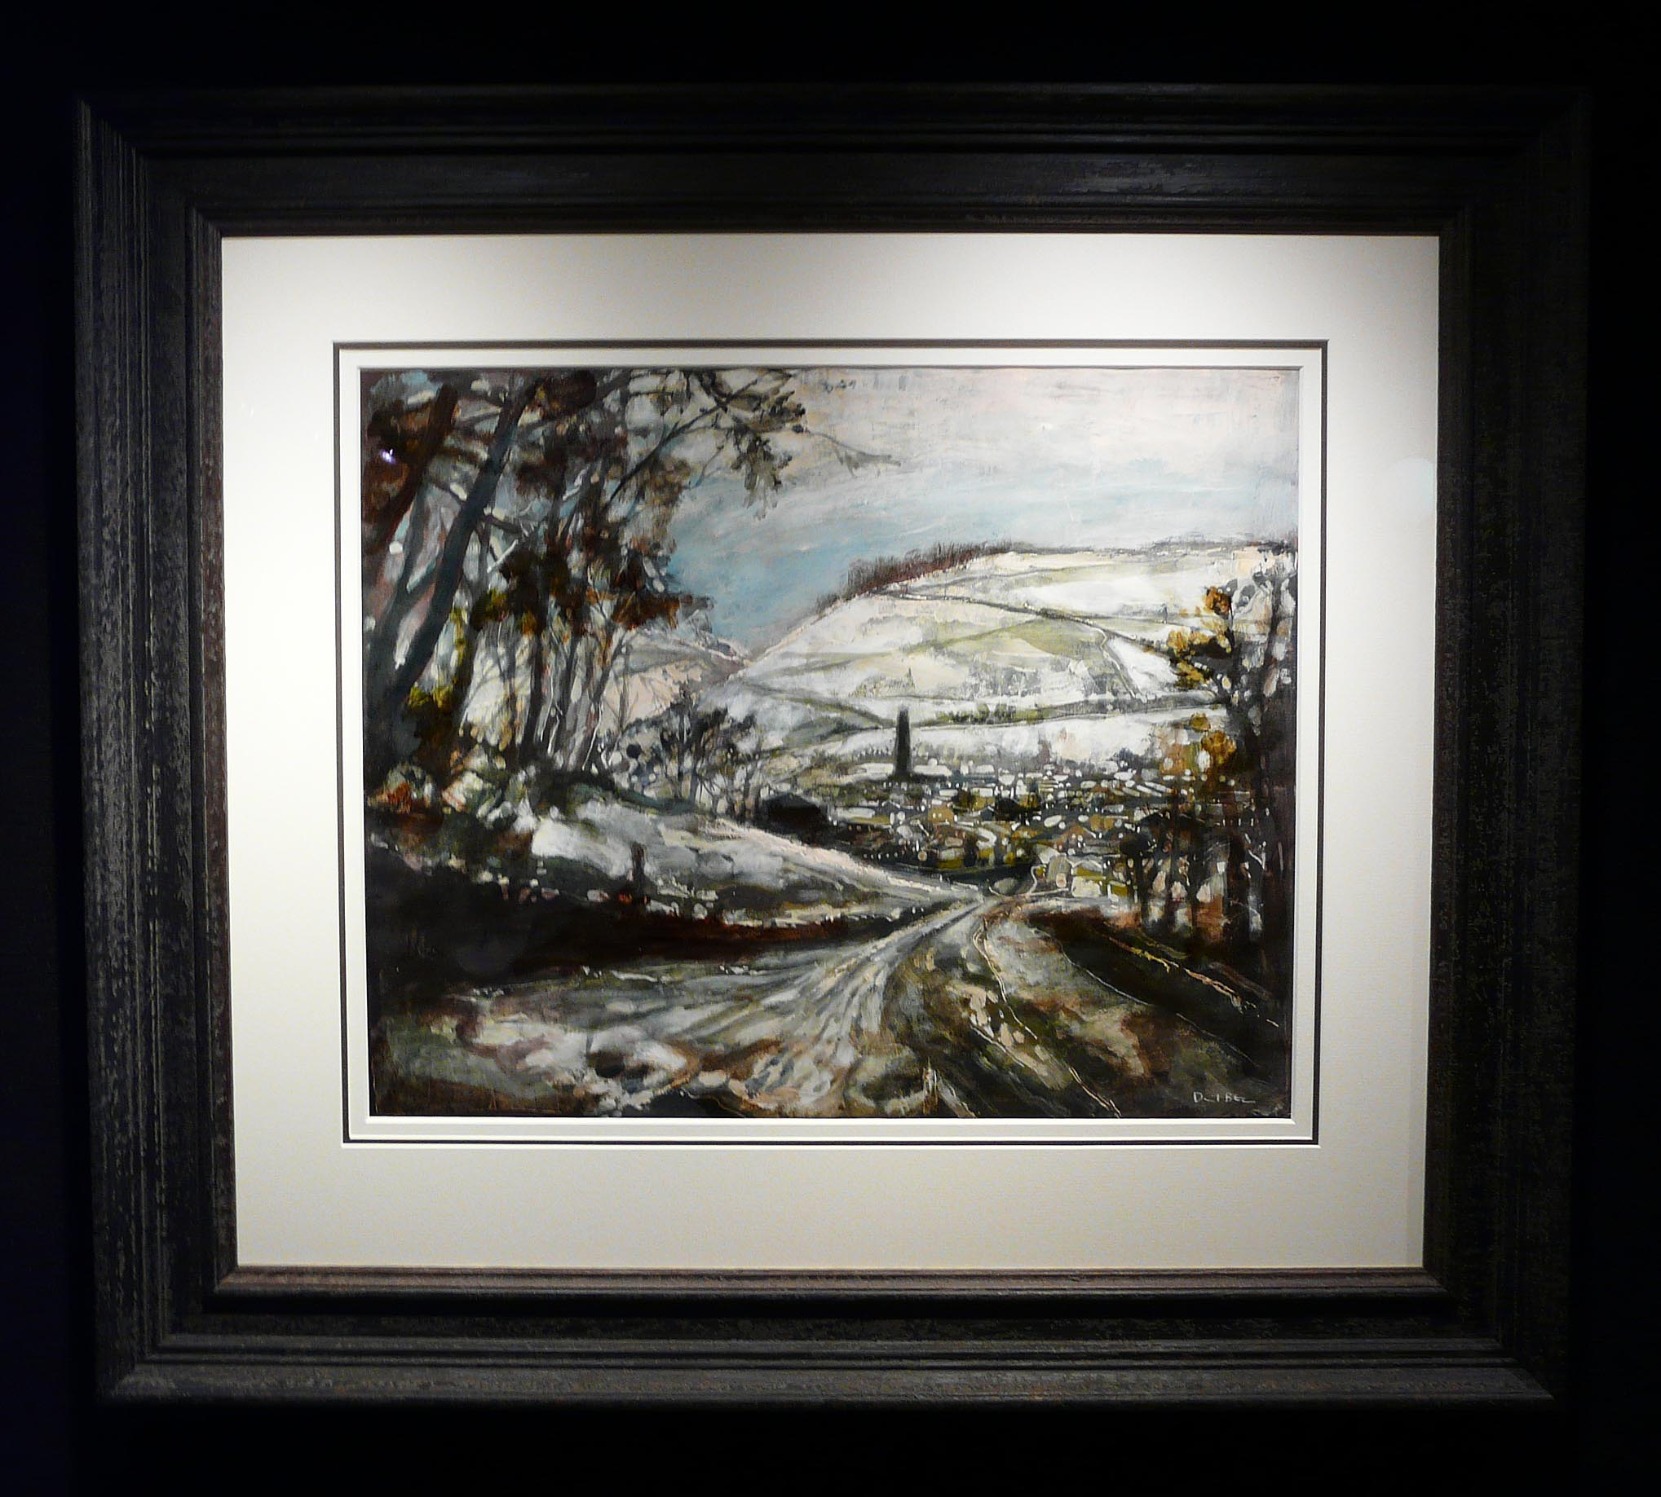 The Only Road into Town by David Bez, Northern | Nostalgic | Snow | Landscape | Local